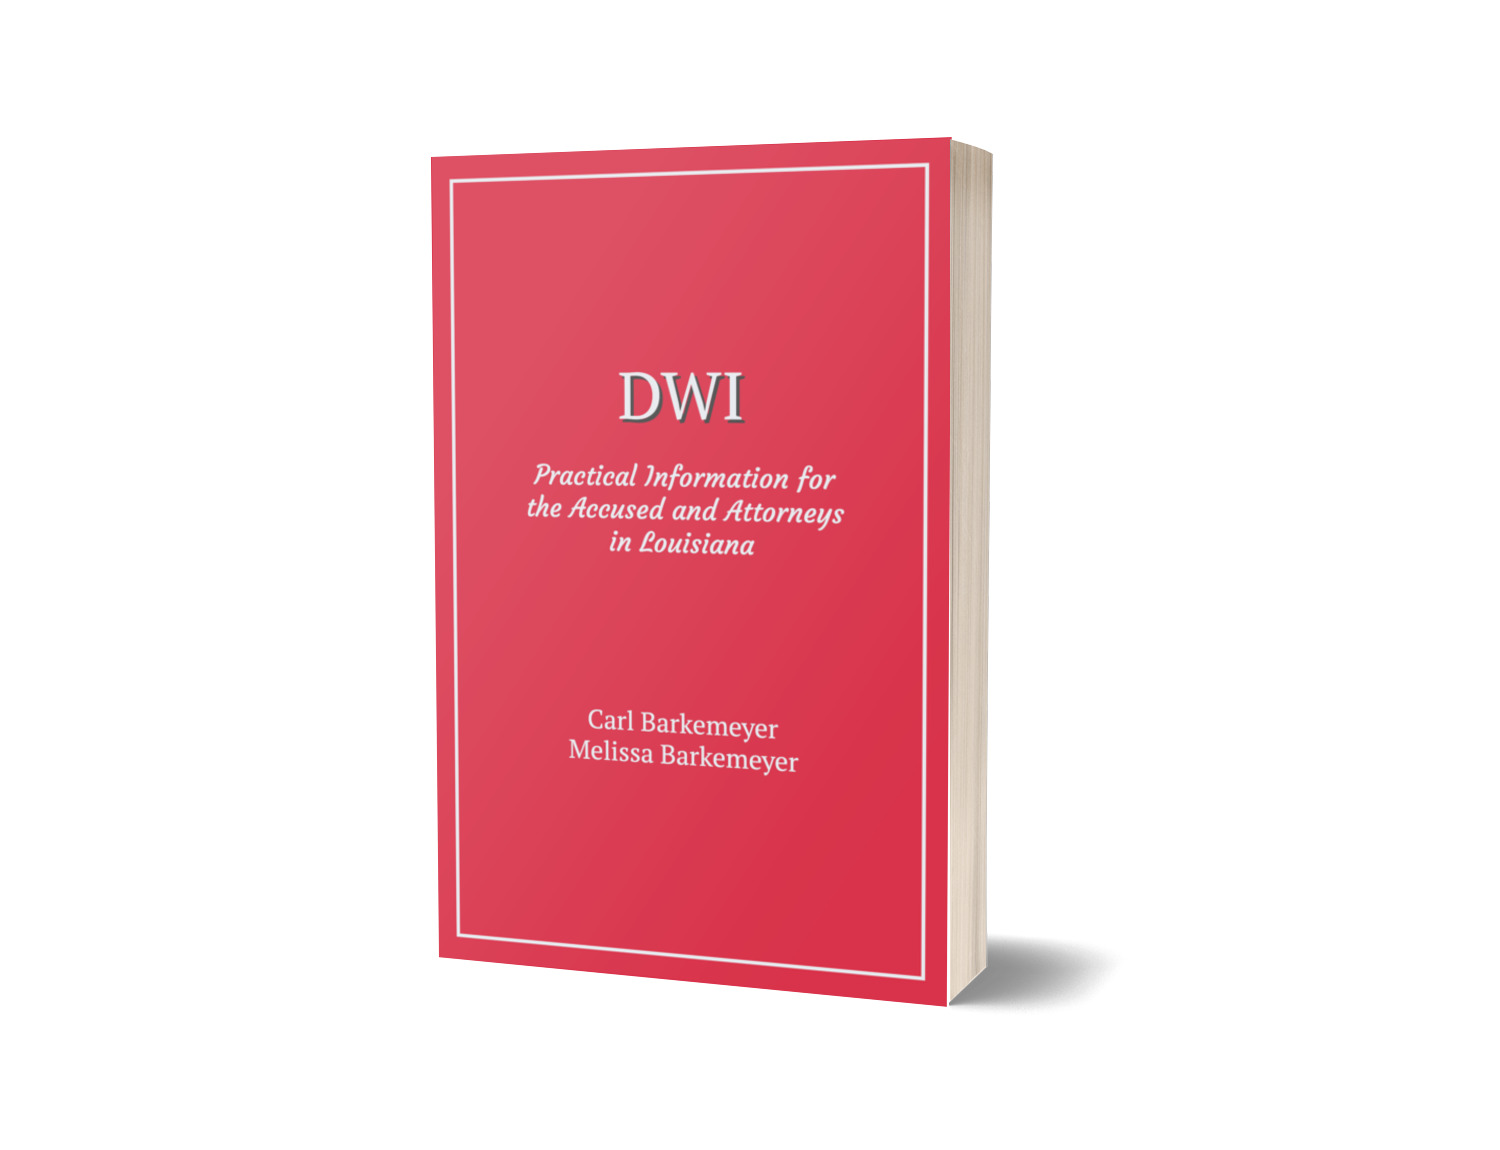 DWI: Practical Information for the Accused and Attorneys in Louisiana